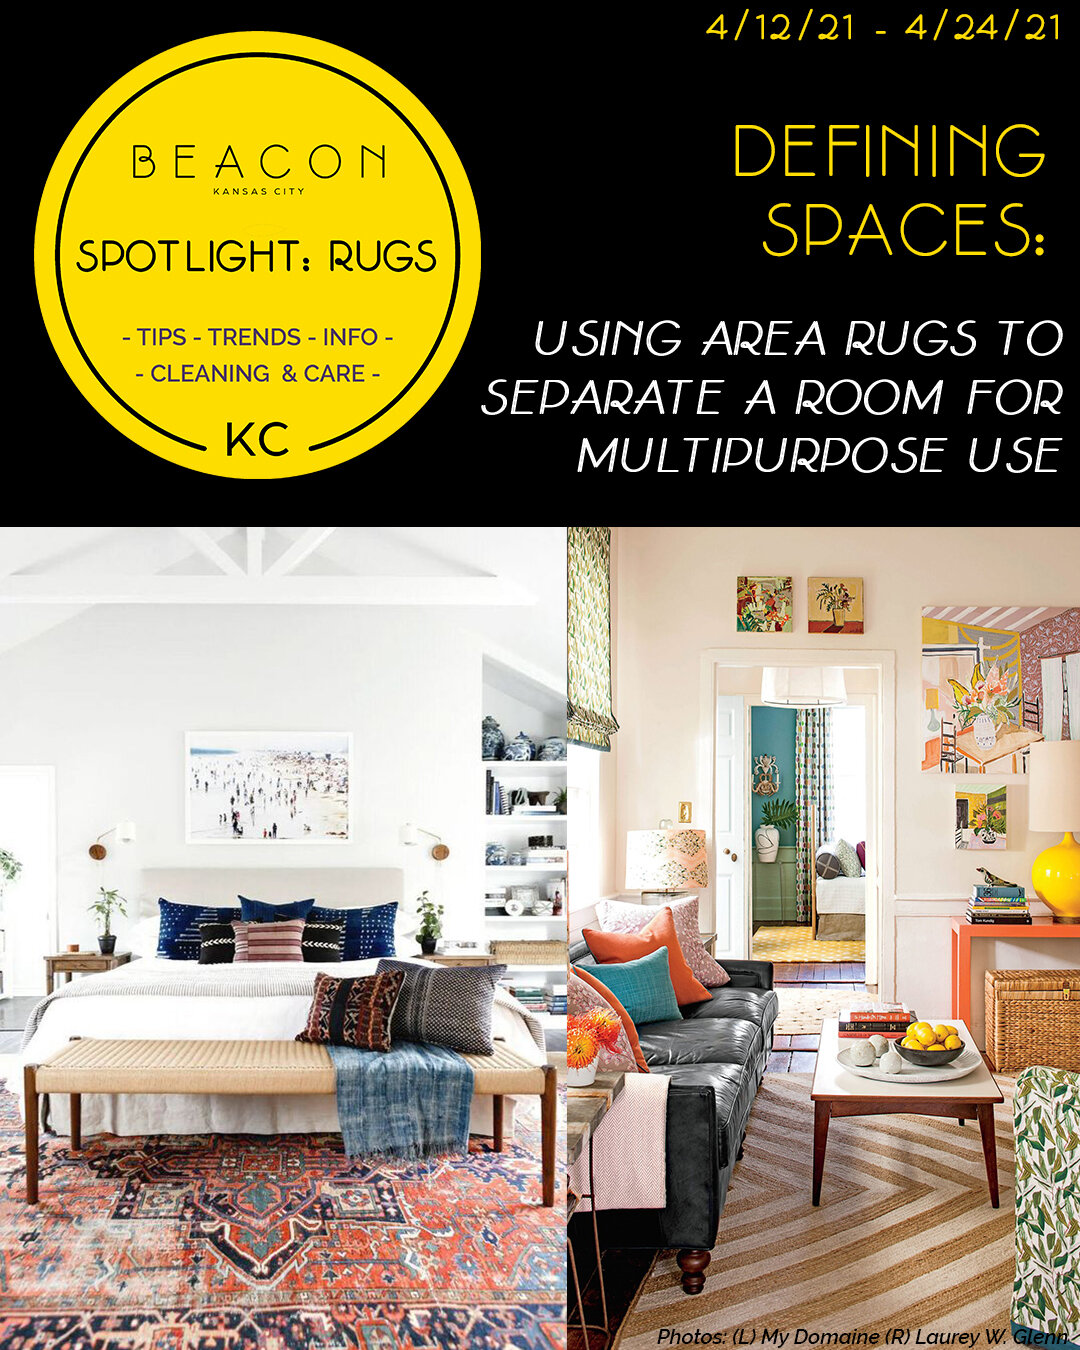 Mild Eastern vente SPOTLIGHT: RUG BLOG - defining spaces: using area rugs to separate a room  for multipurpose use — BEACON KC